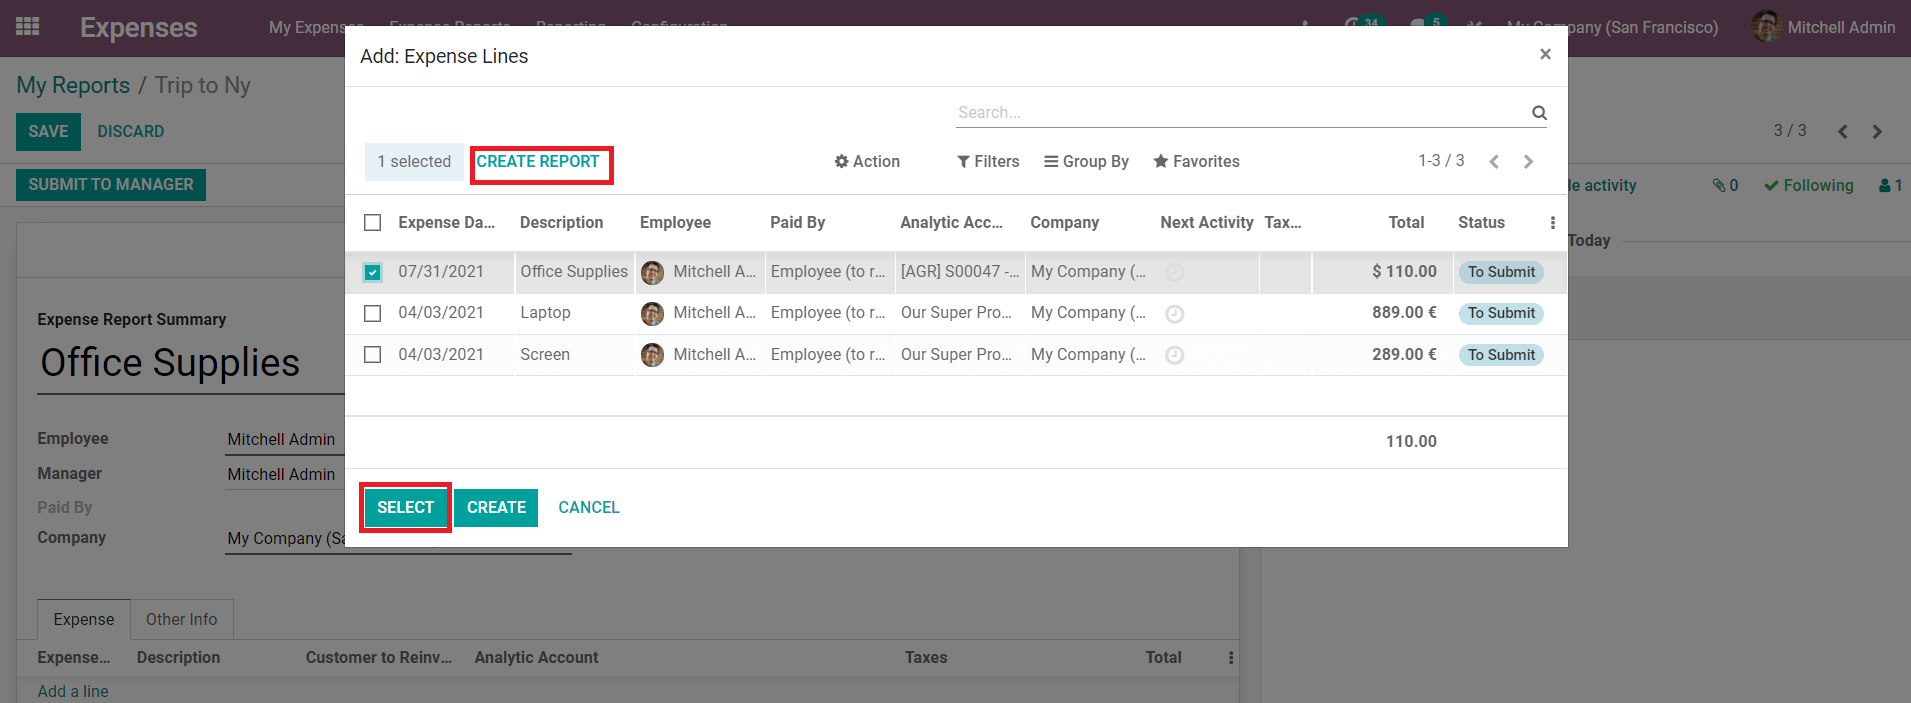 expense-management-module-in-odoo-14